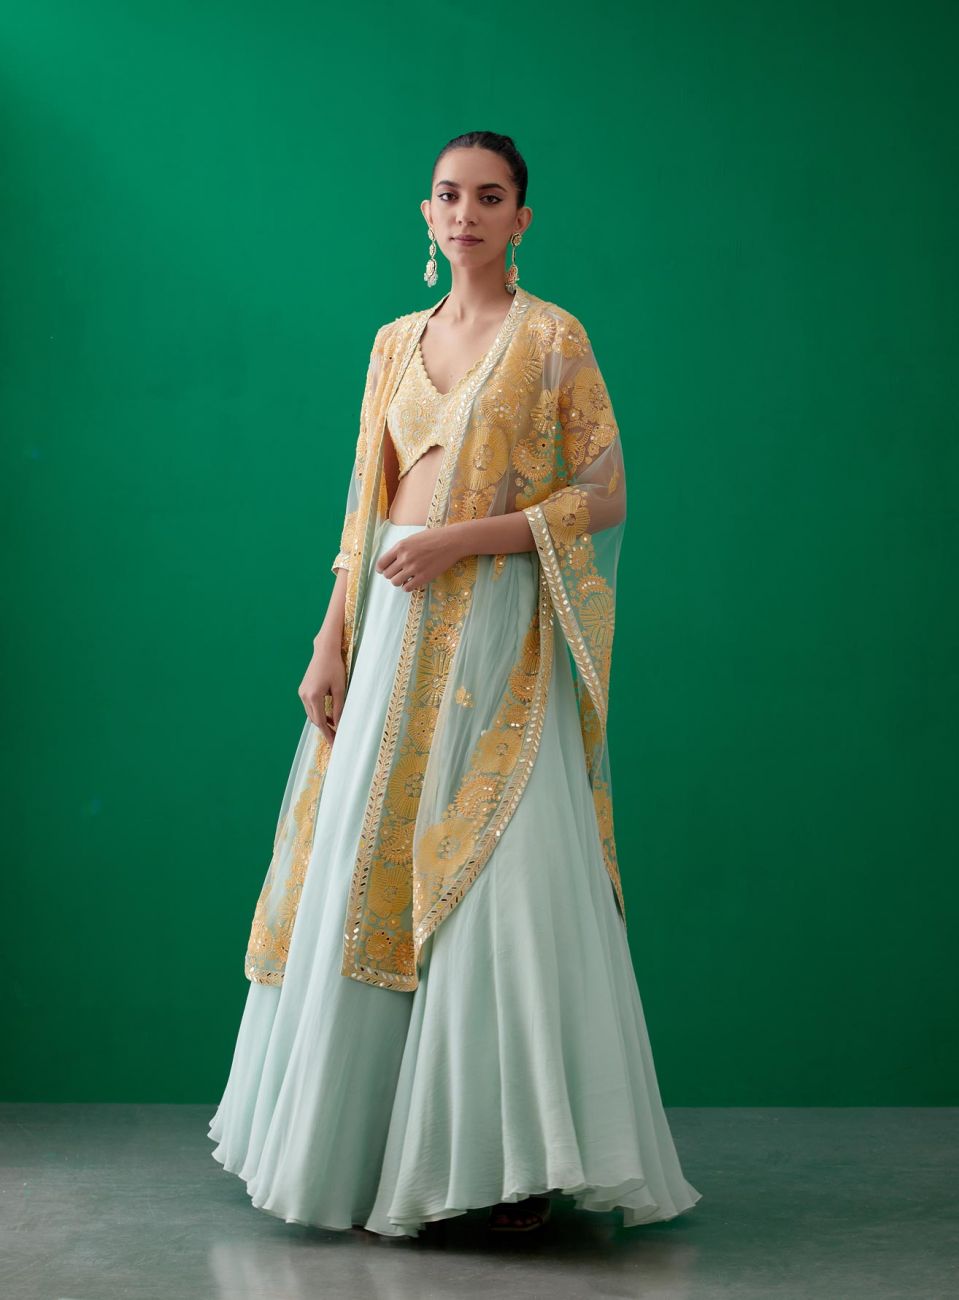 Mint Green Long Cape Set Indian Clothing in Denver, CO, Aurora, CO, Boulder, CO, Fort Collins, CO, Colorado Springs, CO, Parker, CO, Highlands Ranch, CO, Cherry Creek, CO, Centennial, CO, and Longmont, CO. NATIONWIDE SHIPPING USA- India Fashion X